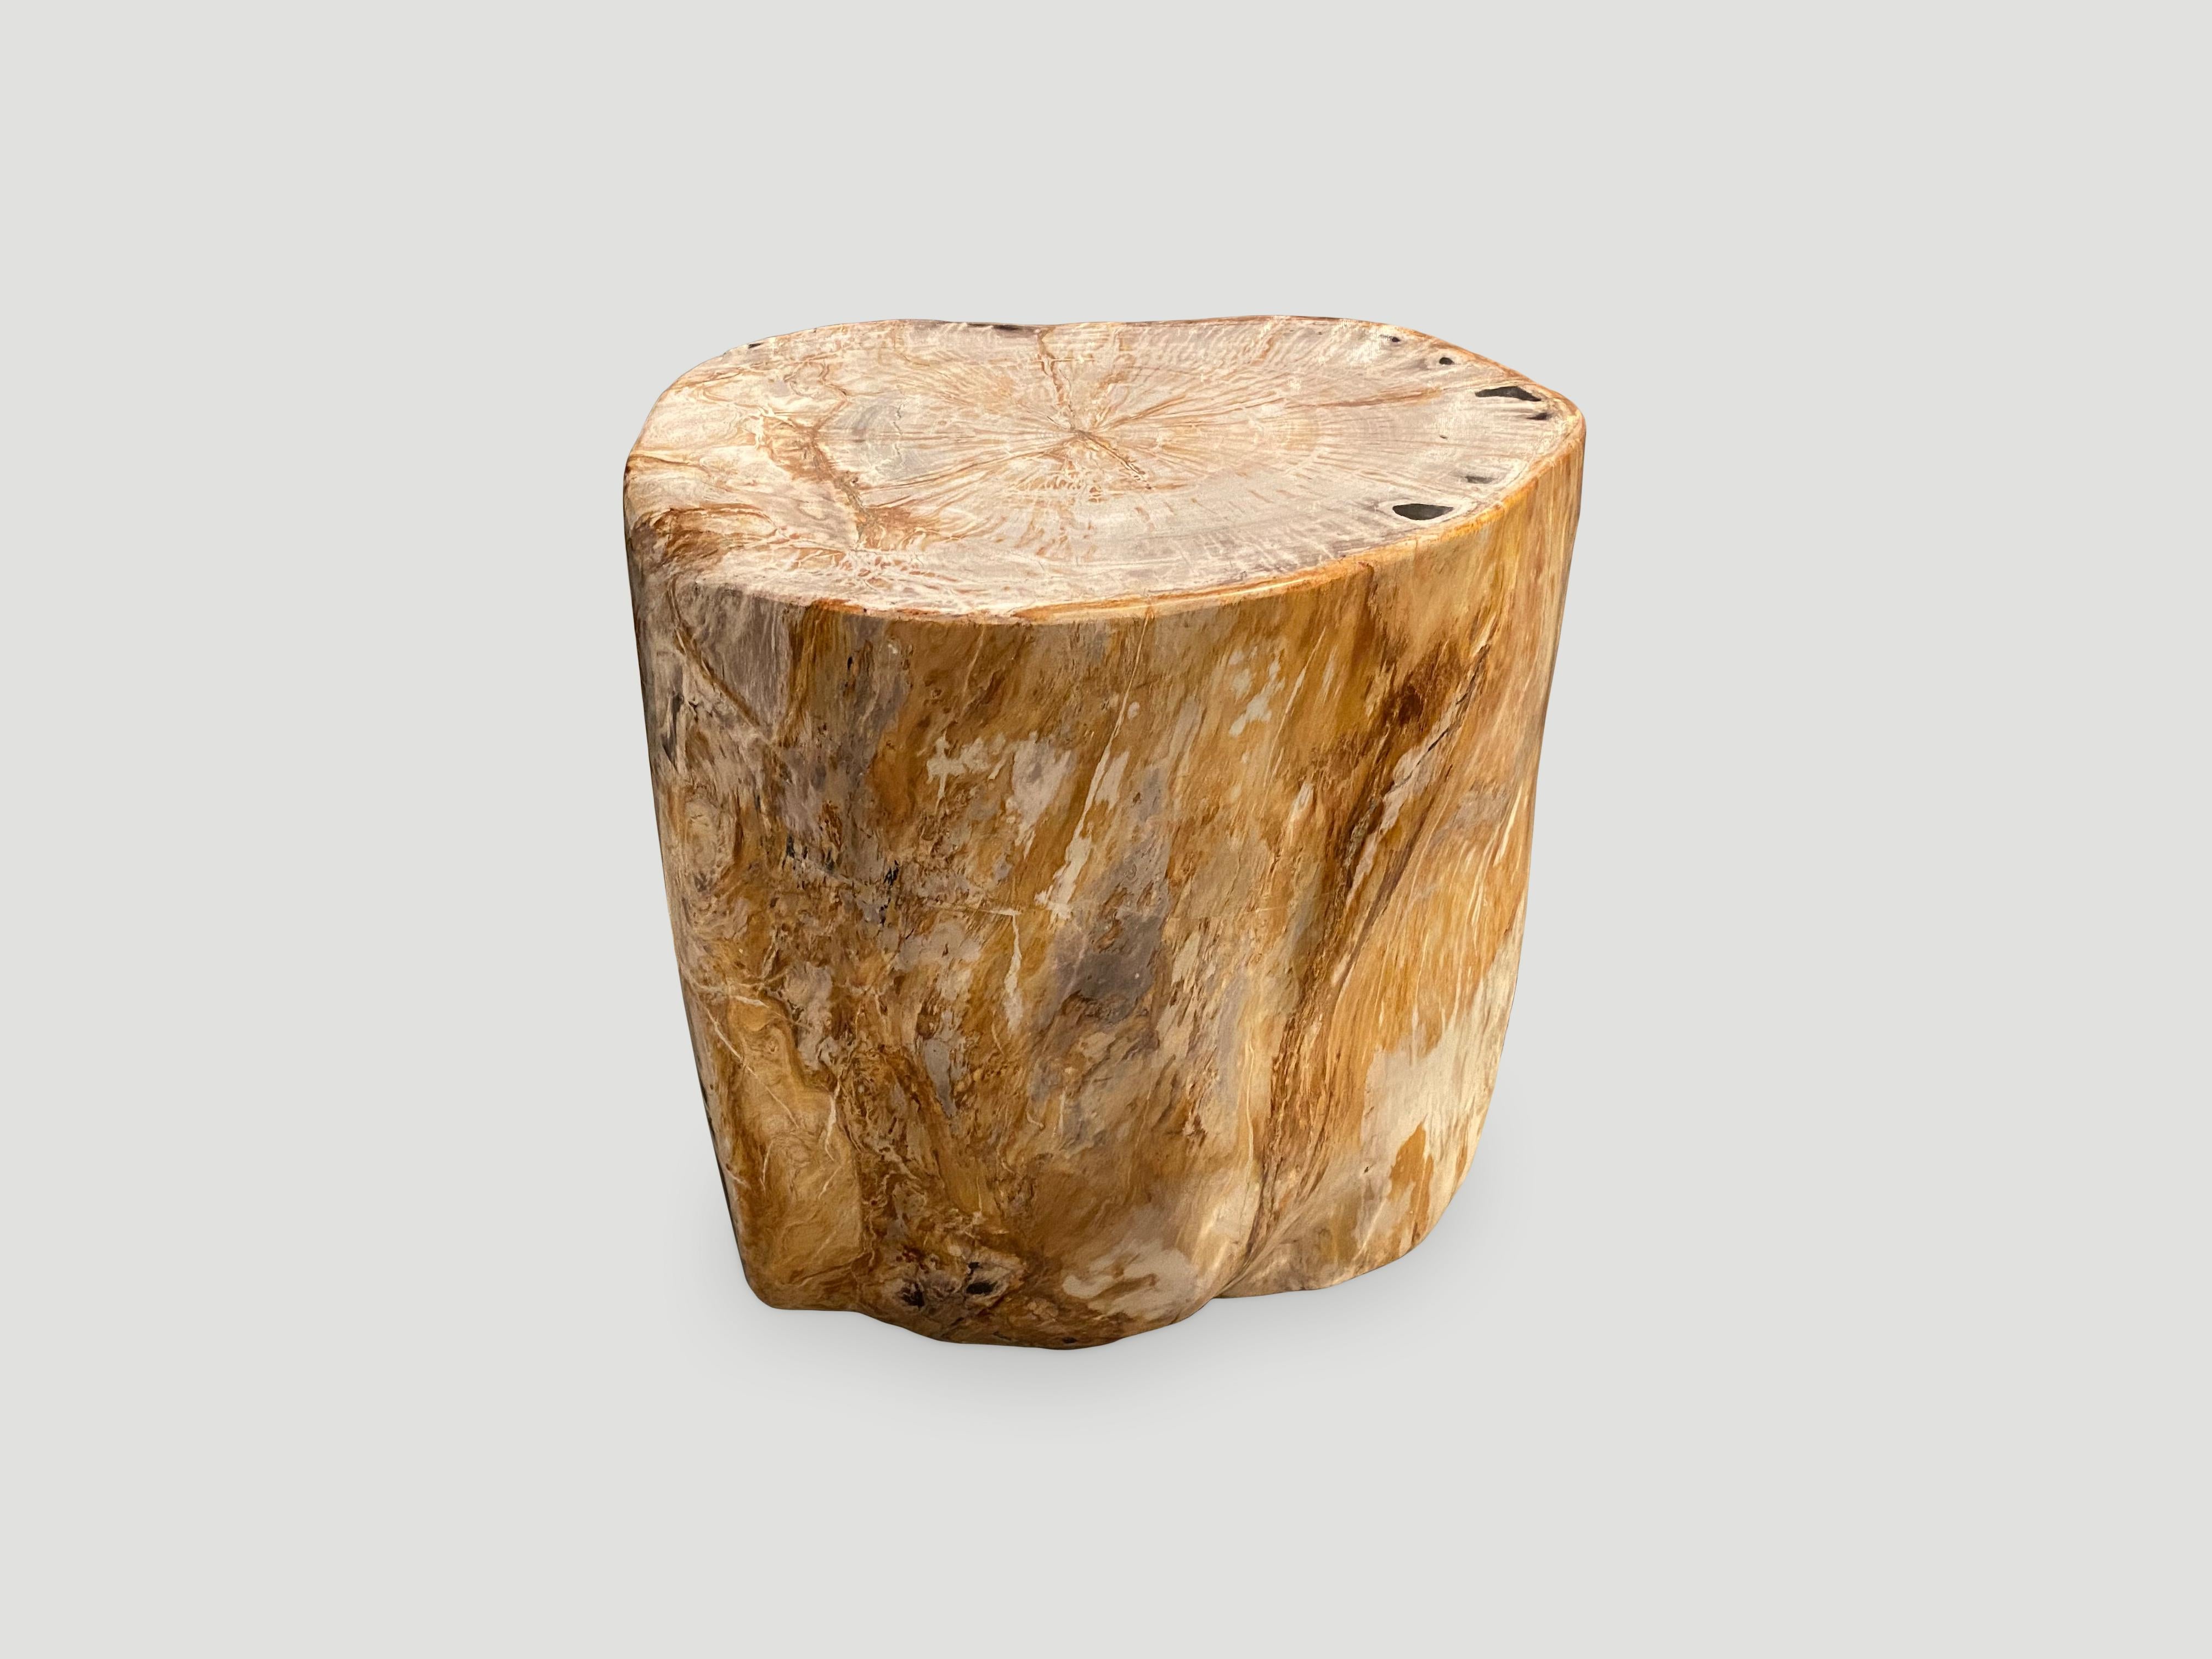 Beautiful high quality petrified wood side table. It’s fascinating how Mother Nature produces these exquisite 40 million year old petrified teak logs with such contrasting colors and natural patterns and markings throughout. Modern yet with so much